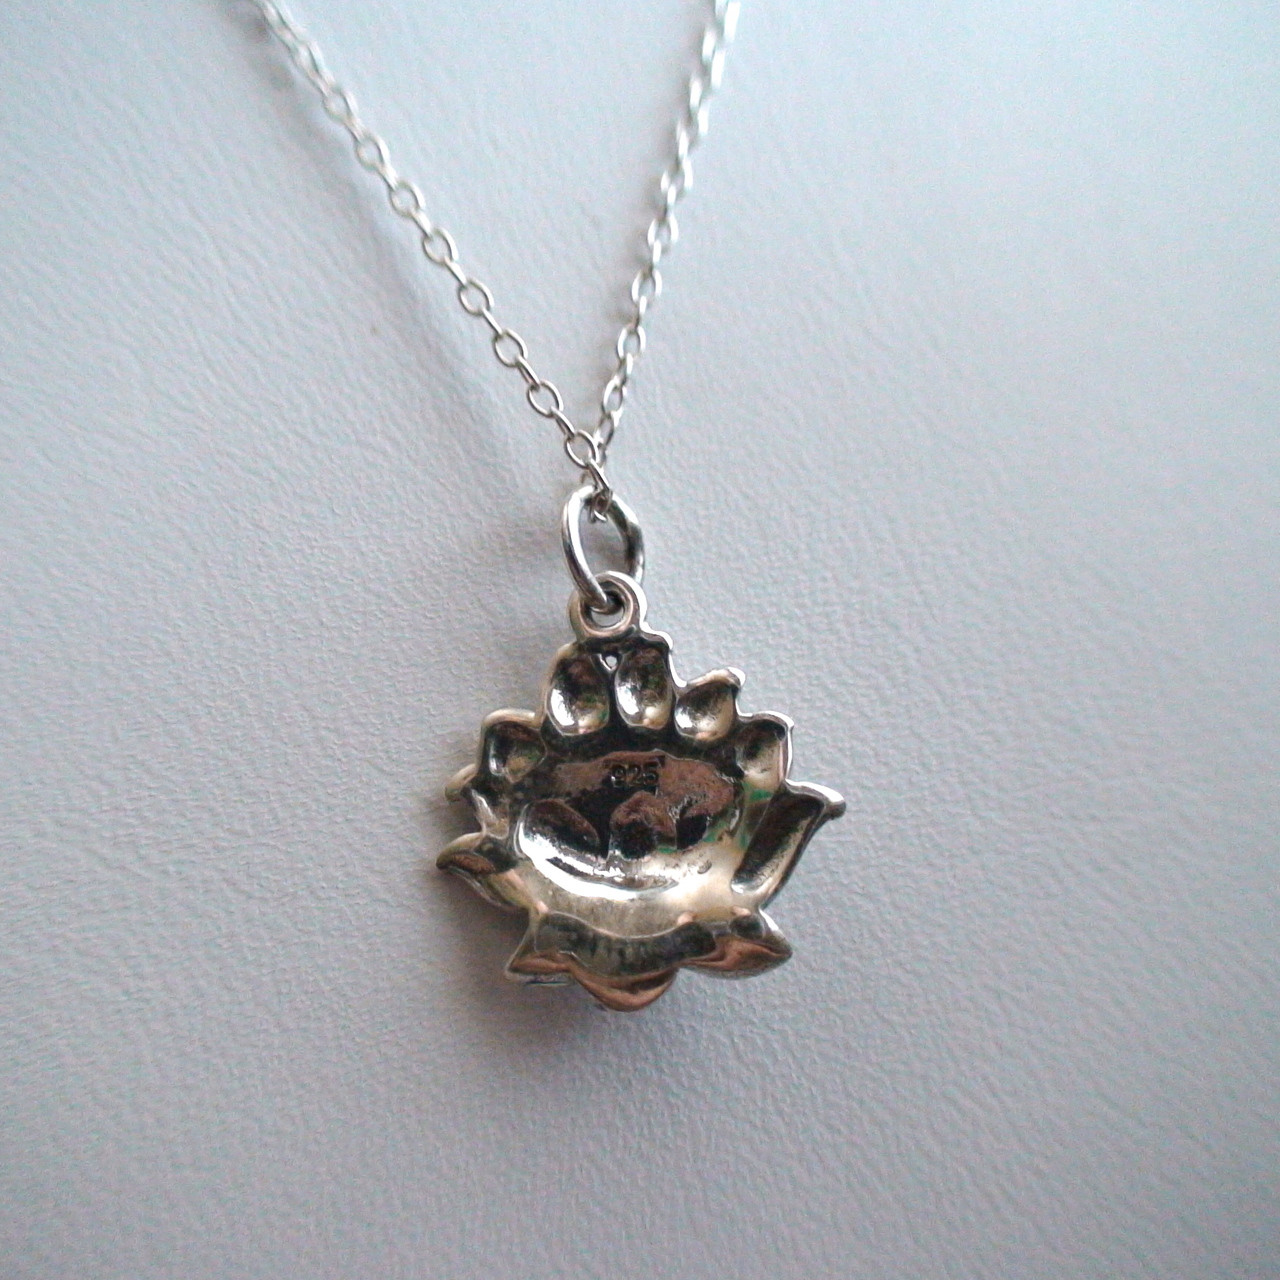 Lotus Flower Necklace - Sterling Silver